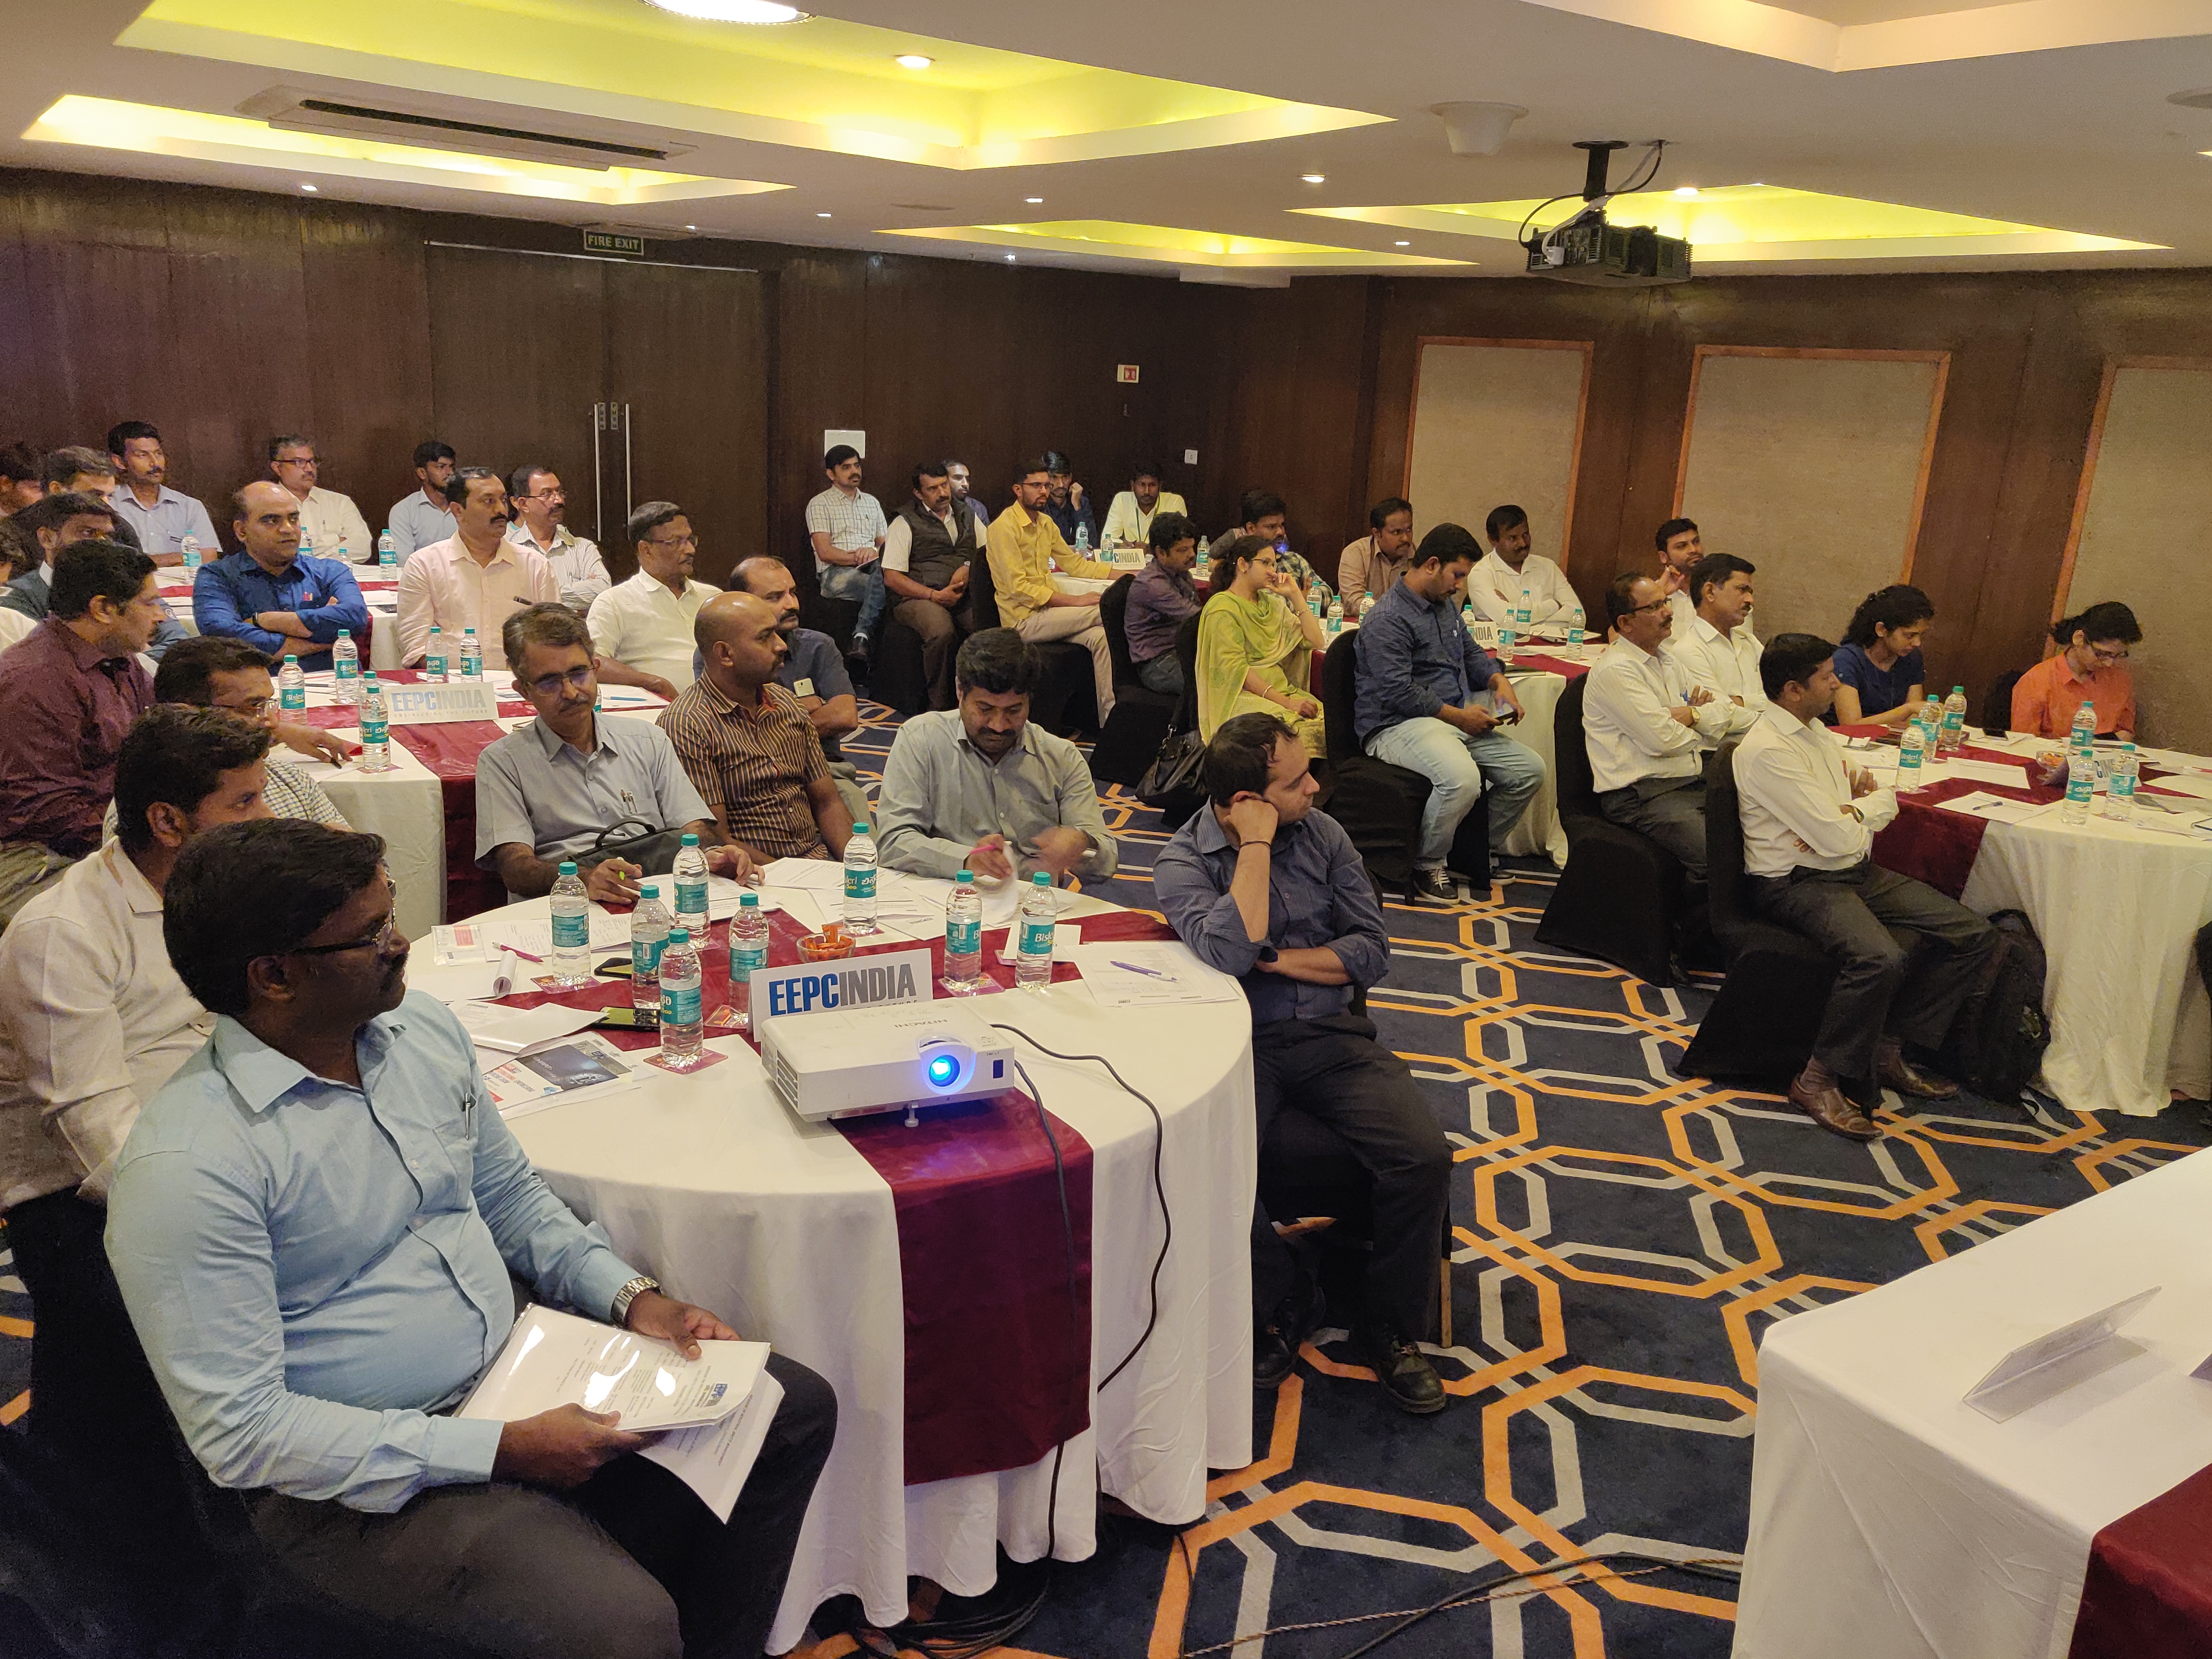 Participants at the Seminar on Industrial Waste Management at Bengaluru